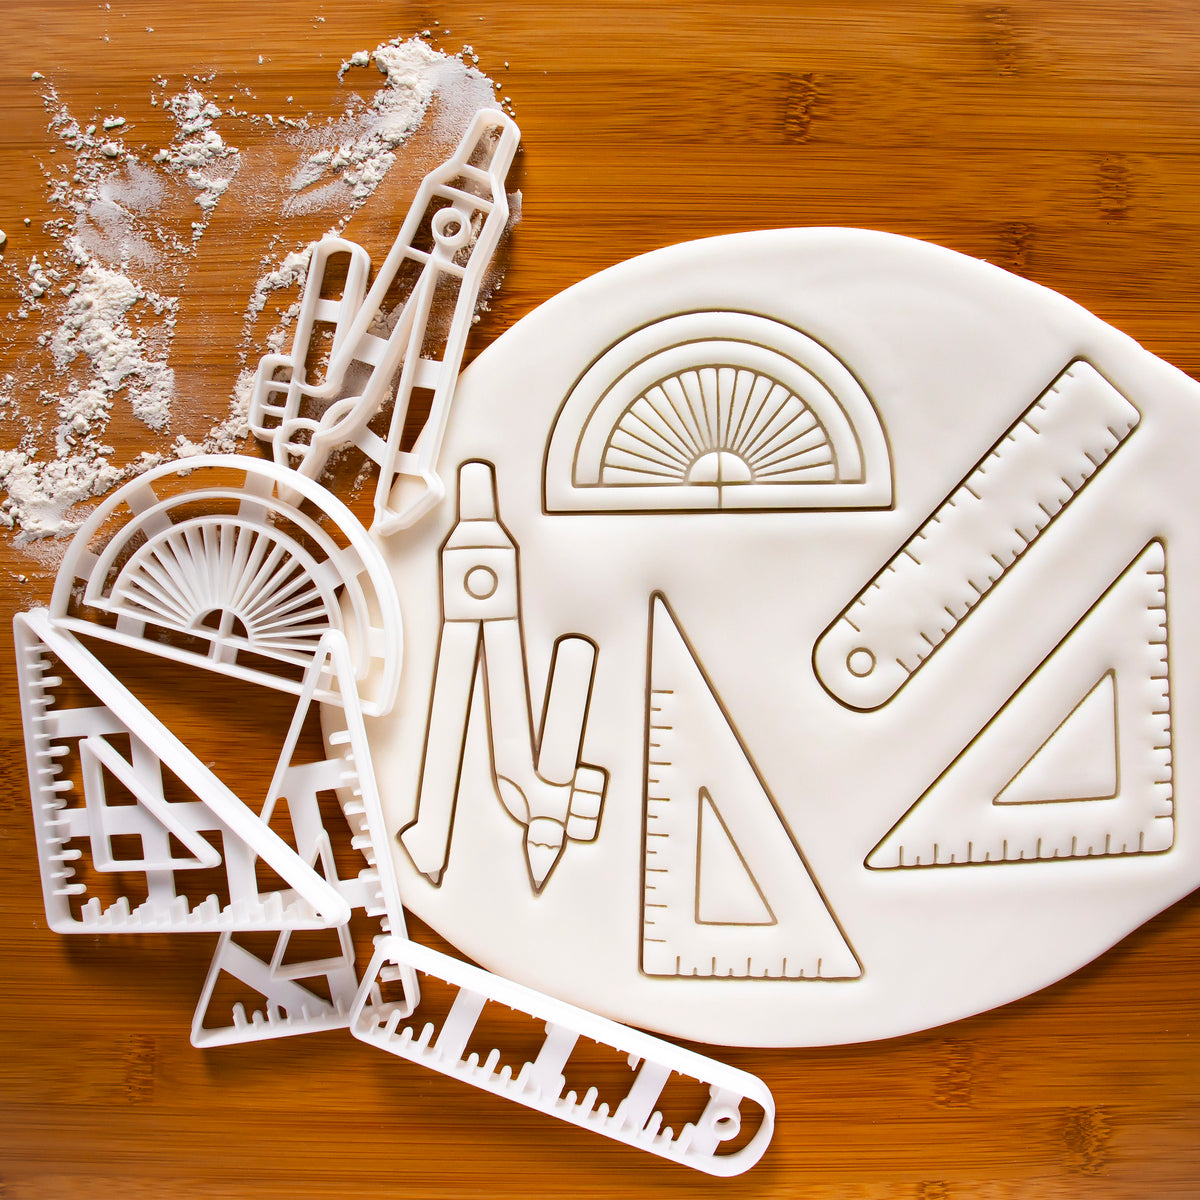 Set of 5 Technical Drawing Instrument Cookie Cutters: Compass, Ruler, 45 Degree Set Square, 60 Degree Set Square, Ruler